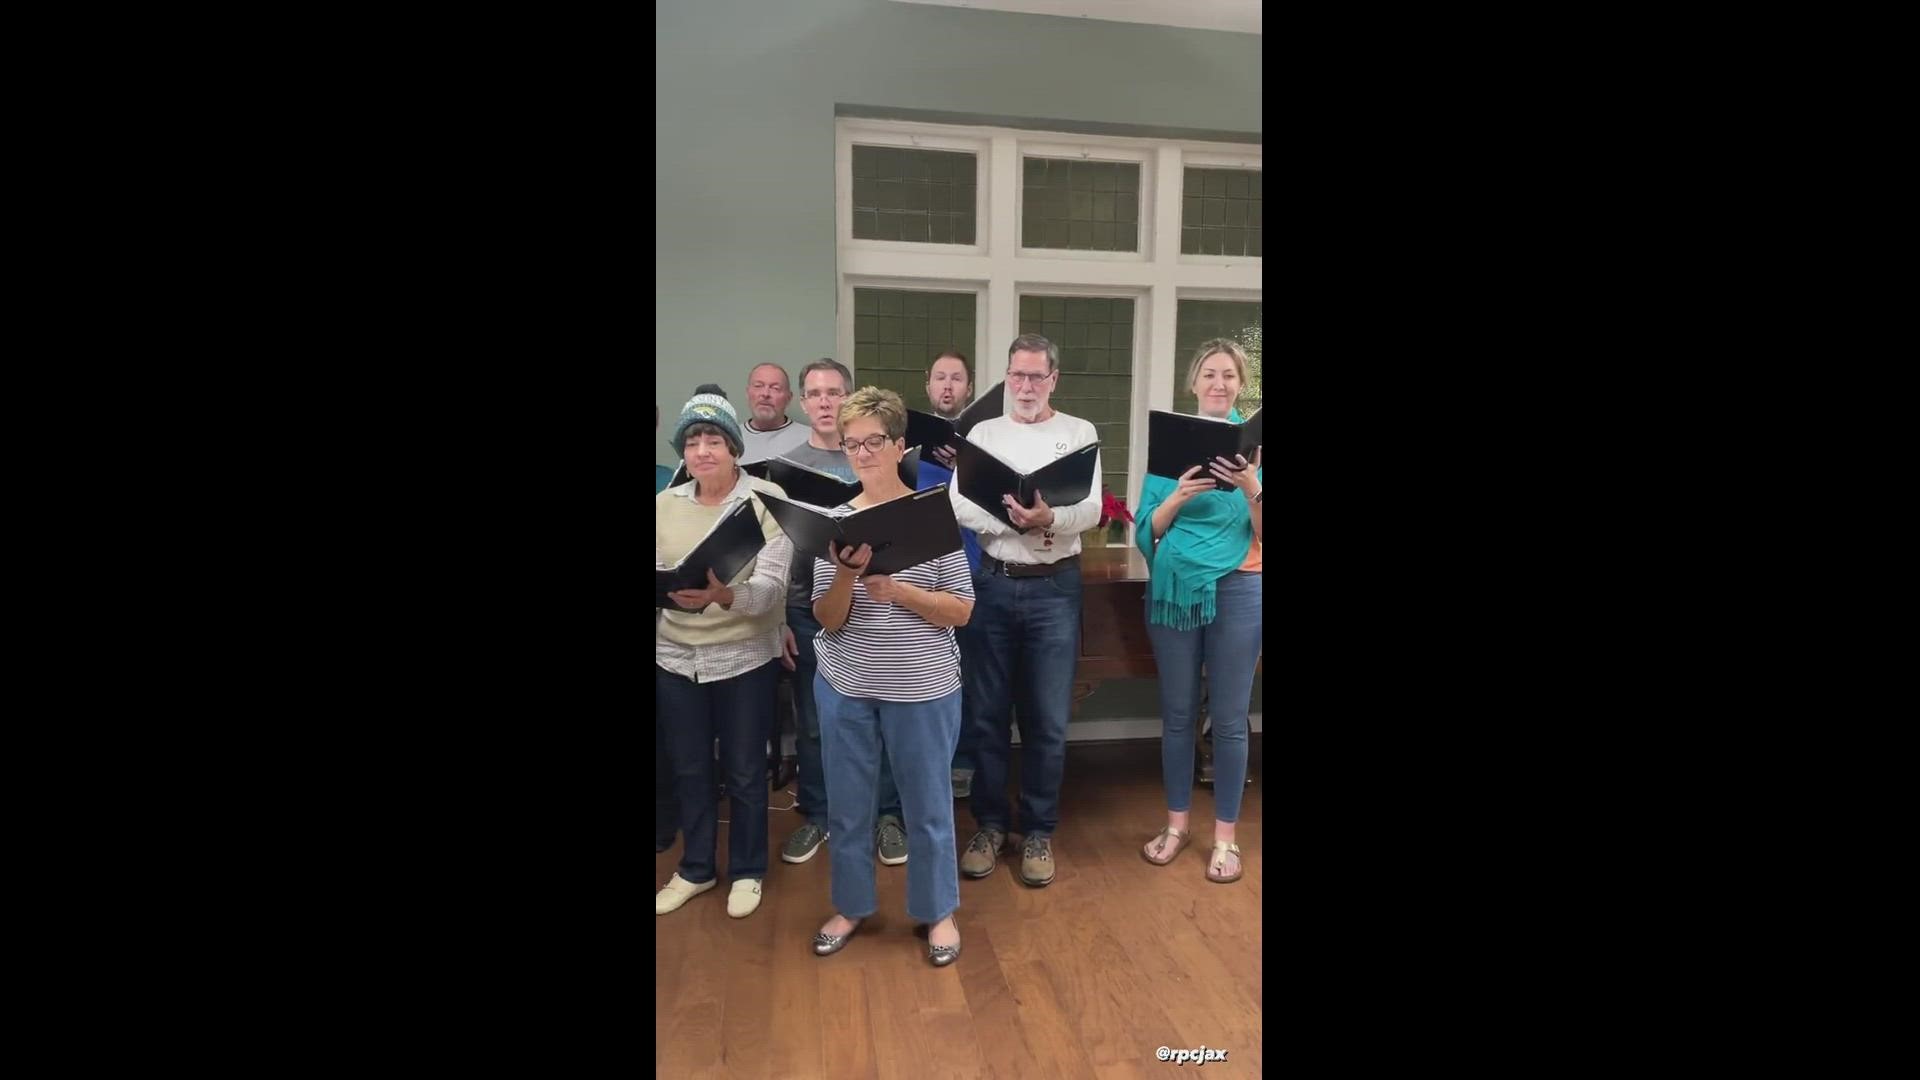 Riverside Presbyterian Church recorded the video to send the Jaguars off to KC.